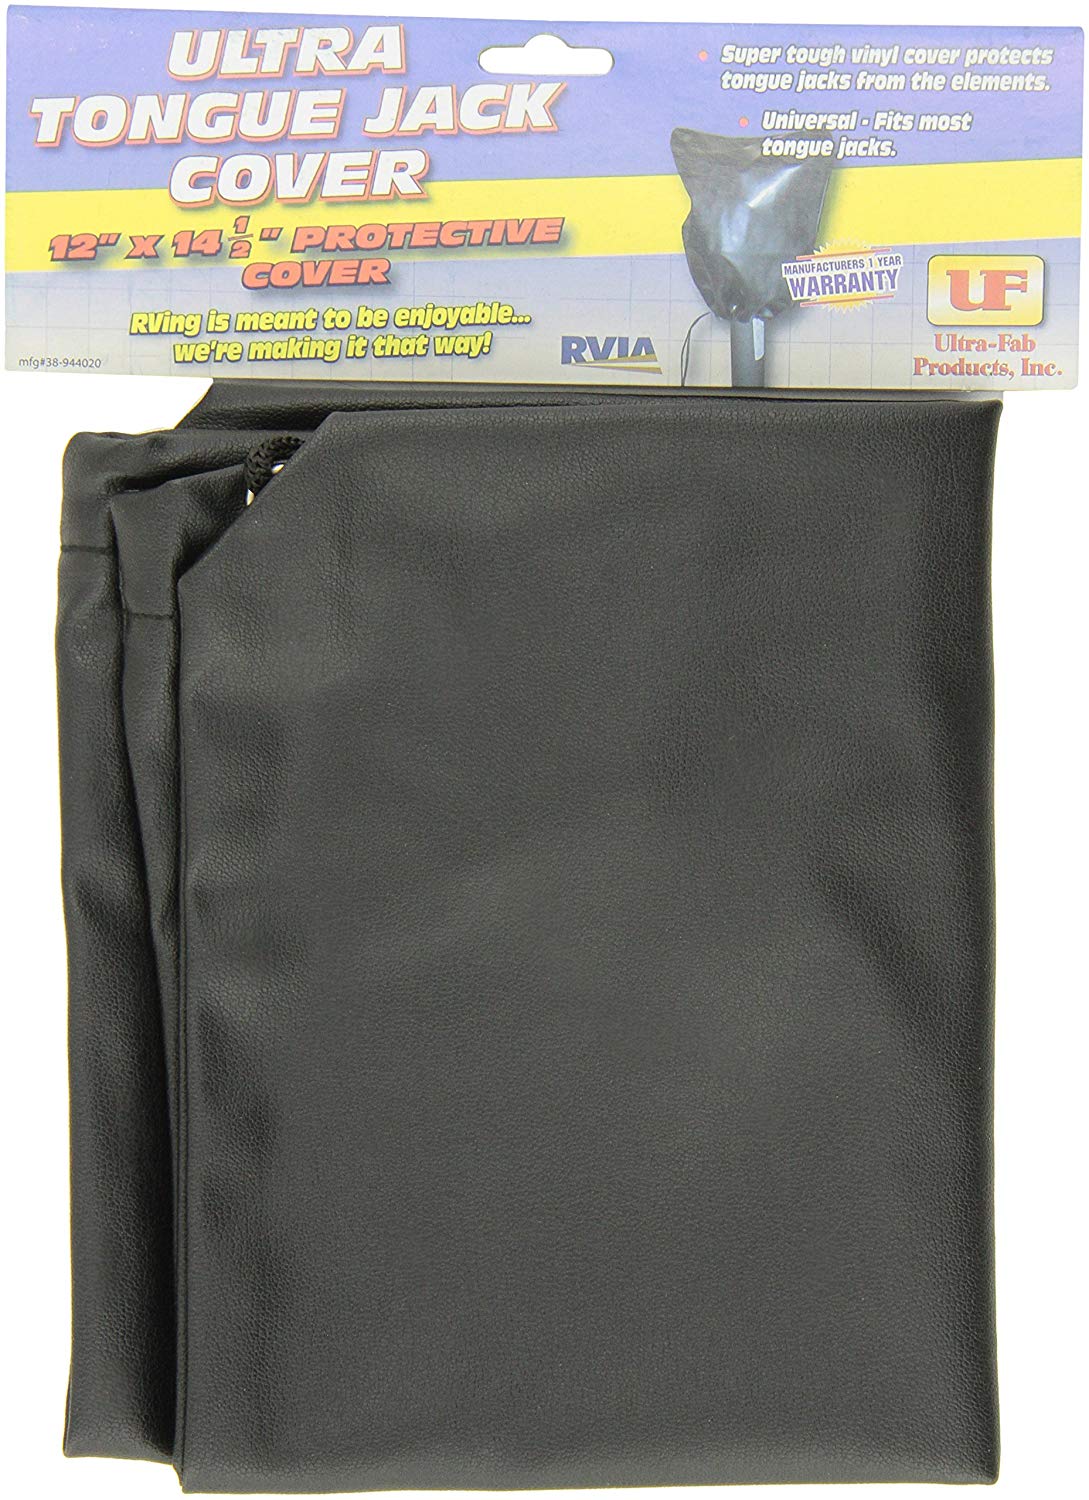 Ultra-Fab 38-944020 Electric Tongue Jack Protective Cover